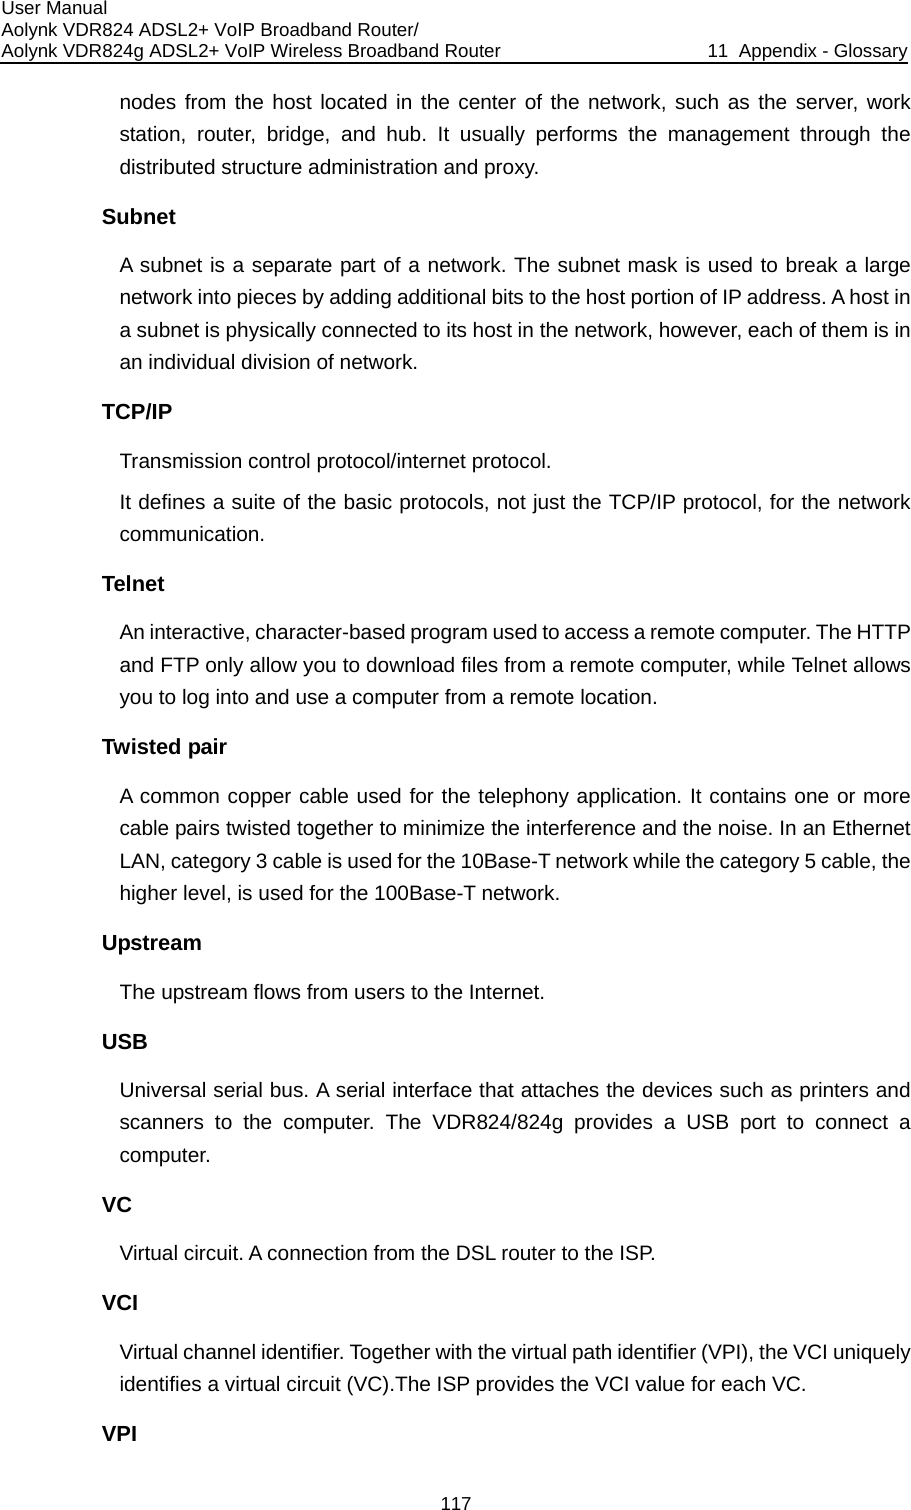 User Manual Aolynk VDR824 ADSL2+ VoIP Broadband Router/ Aolynk VDR824g ADSL2+ VoIP Wireless Broadband Router  11  Appendix - Glossary 117 rough the buted structure administration and proxy. Subnet ak a large by adding additional bits to the host portion of IP address. A host in ysically connected to its host in the network, however, each of them is in TCP/IP col. suite of the basic protocols, not just the TCP/IP protocol, for the network communication. Tteractive, character-based program used to access a remote computer. The HTTP and FTP only allow you to download files from a remote computer, while Telnet allows Tthe noise. In an Ethernet AN, category 3 cable is used for the 10Base-T network while the category 5 cable, the higher level, is used for the 100Base-T network. Upstream The upstream flows from users to the Internet.  USB Universal serial bus. A serial interface that attaches the devices such as printers and scanners to the computer. The VDR824/824g provides a USB port to connect a computer. VC Virtual circuit. A connection from the DSL router to the ISP. VCI Virtual channel identifier. Together with the virtual path identifier (VPI), the VCI uniquely identifies a virtual circuit (VC).The ISP provides the VCI value for each VC. VPI nodes from the host located in the center of the network, such as the server, work station, router, bridge, and hub. It usually performs the management thdistriA subnet is a separate part of a network. The subnet mask is used to brenetwork into pieces a subnet is phan individual division of network. Transmission control protocol/internet protoIt defines a elnet An inyou to log into and use a computer from a remote location. wisted pair A common copper cable used for the telephony application. It contains one or more cable pairs twisted together to minimize the interference and L